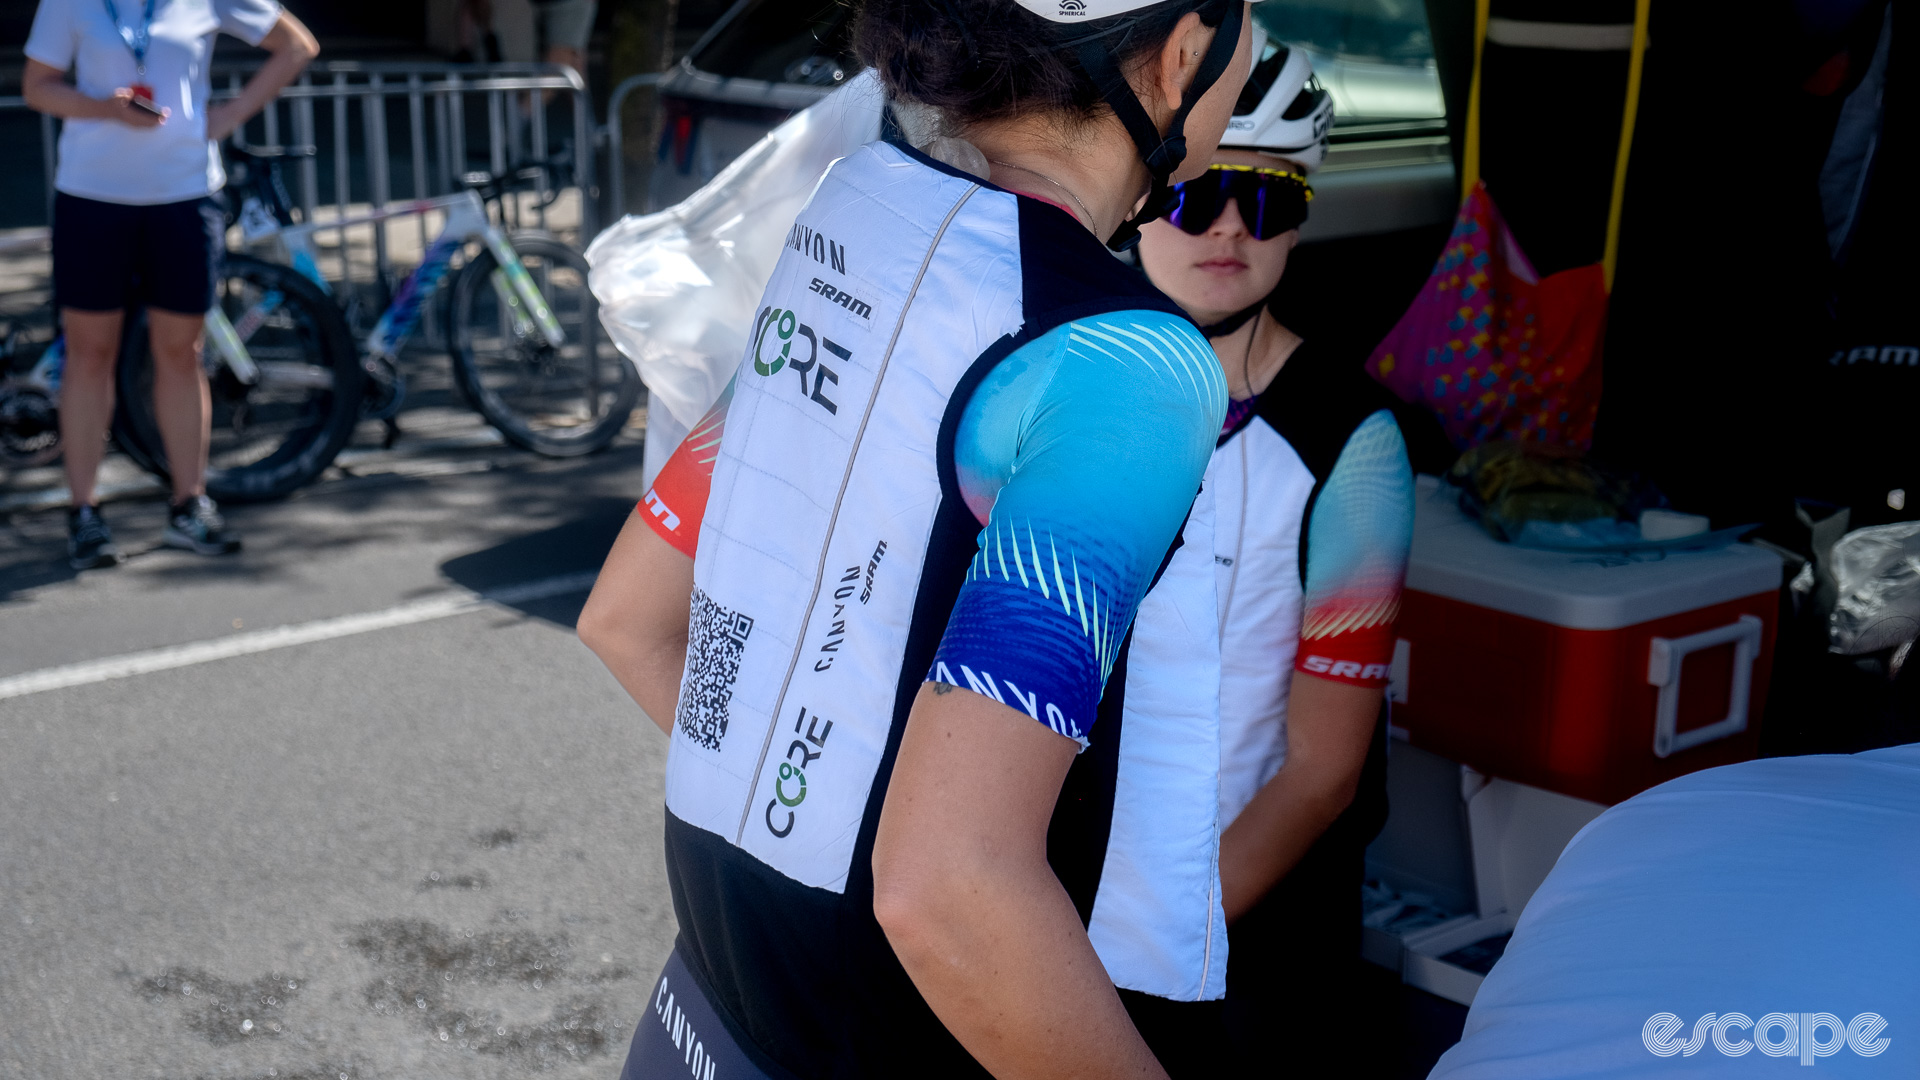 The photo shows two Canyon-SRAM riders wearing white team branded ice vests. 